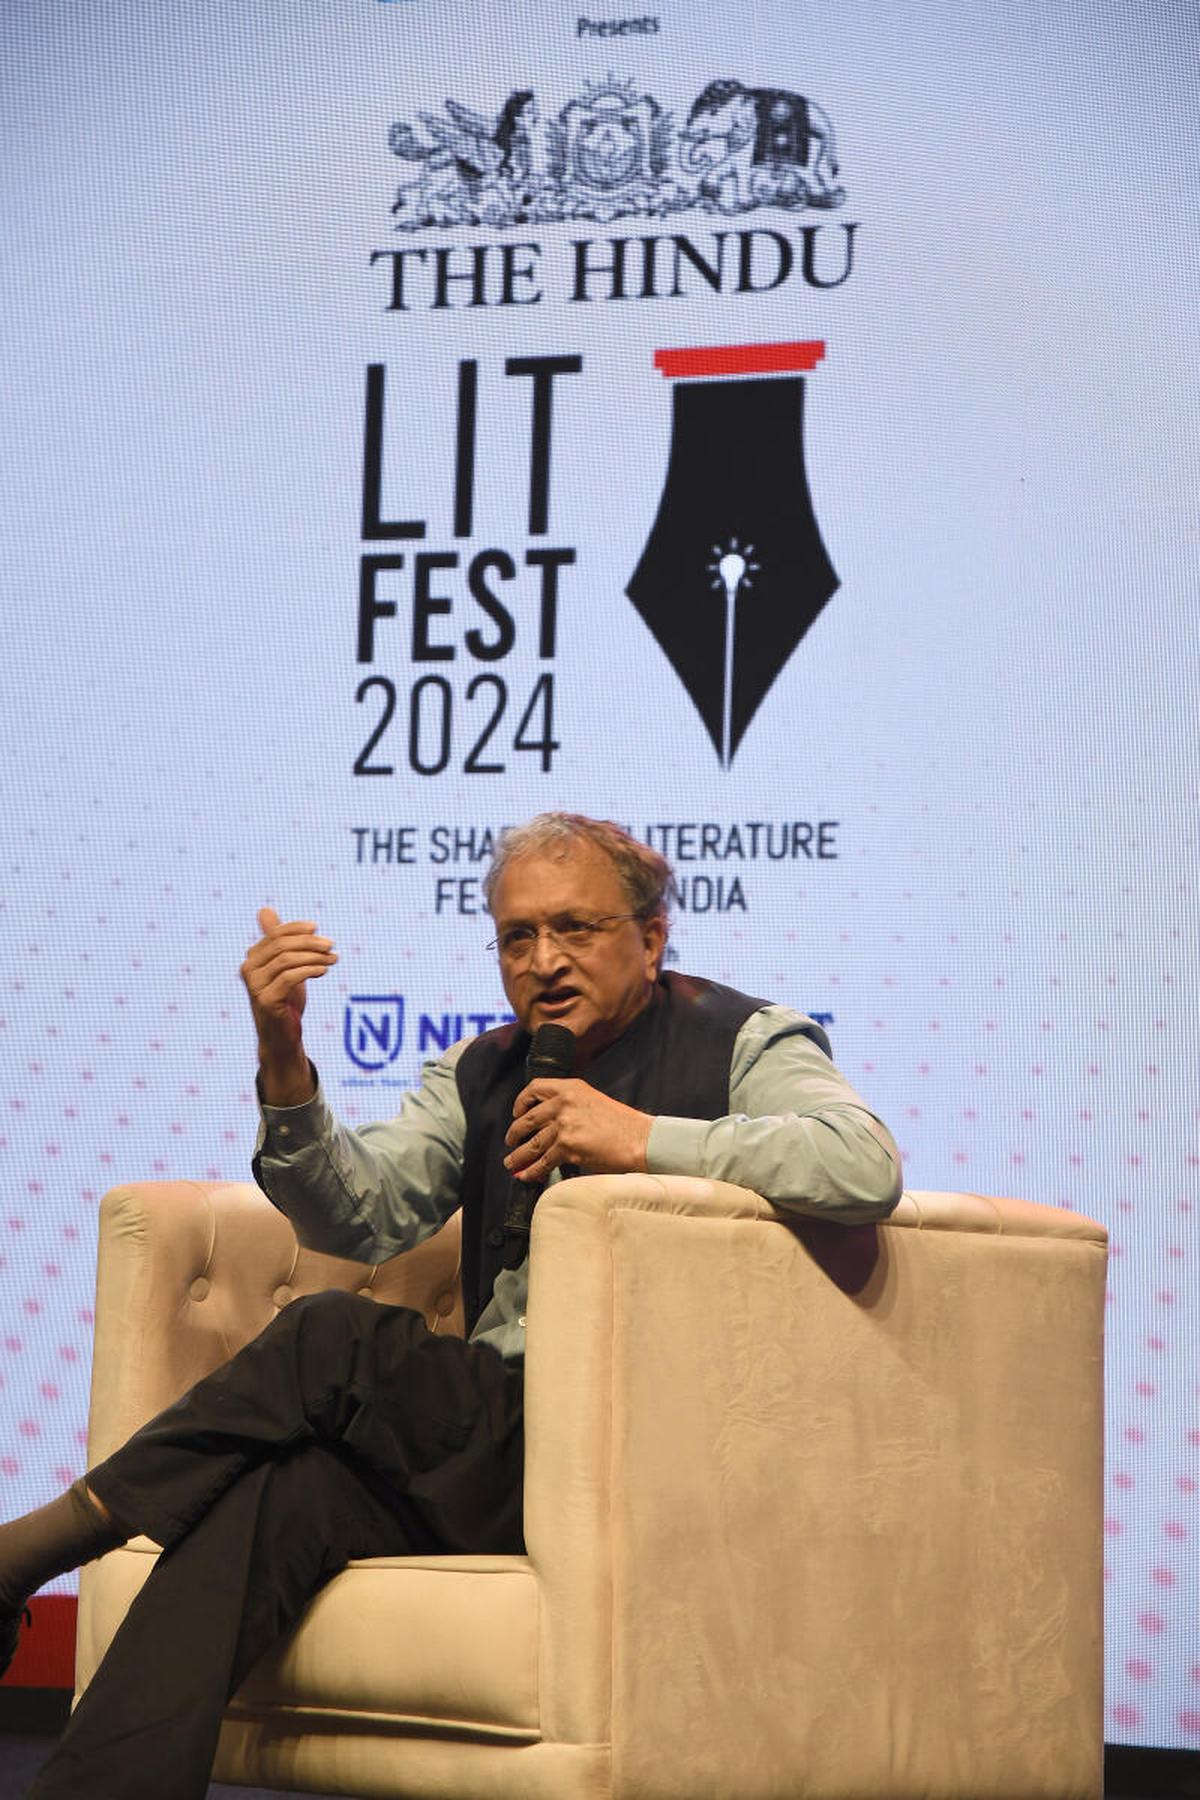 Watch | Ramachandra Guha on his mercurial relationship with his editor | The Hindu Lit Fest 2024